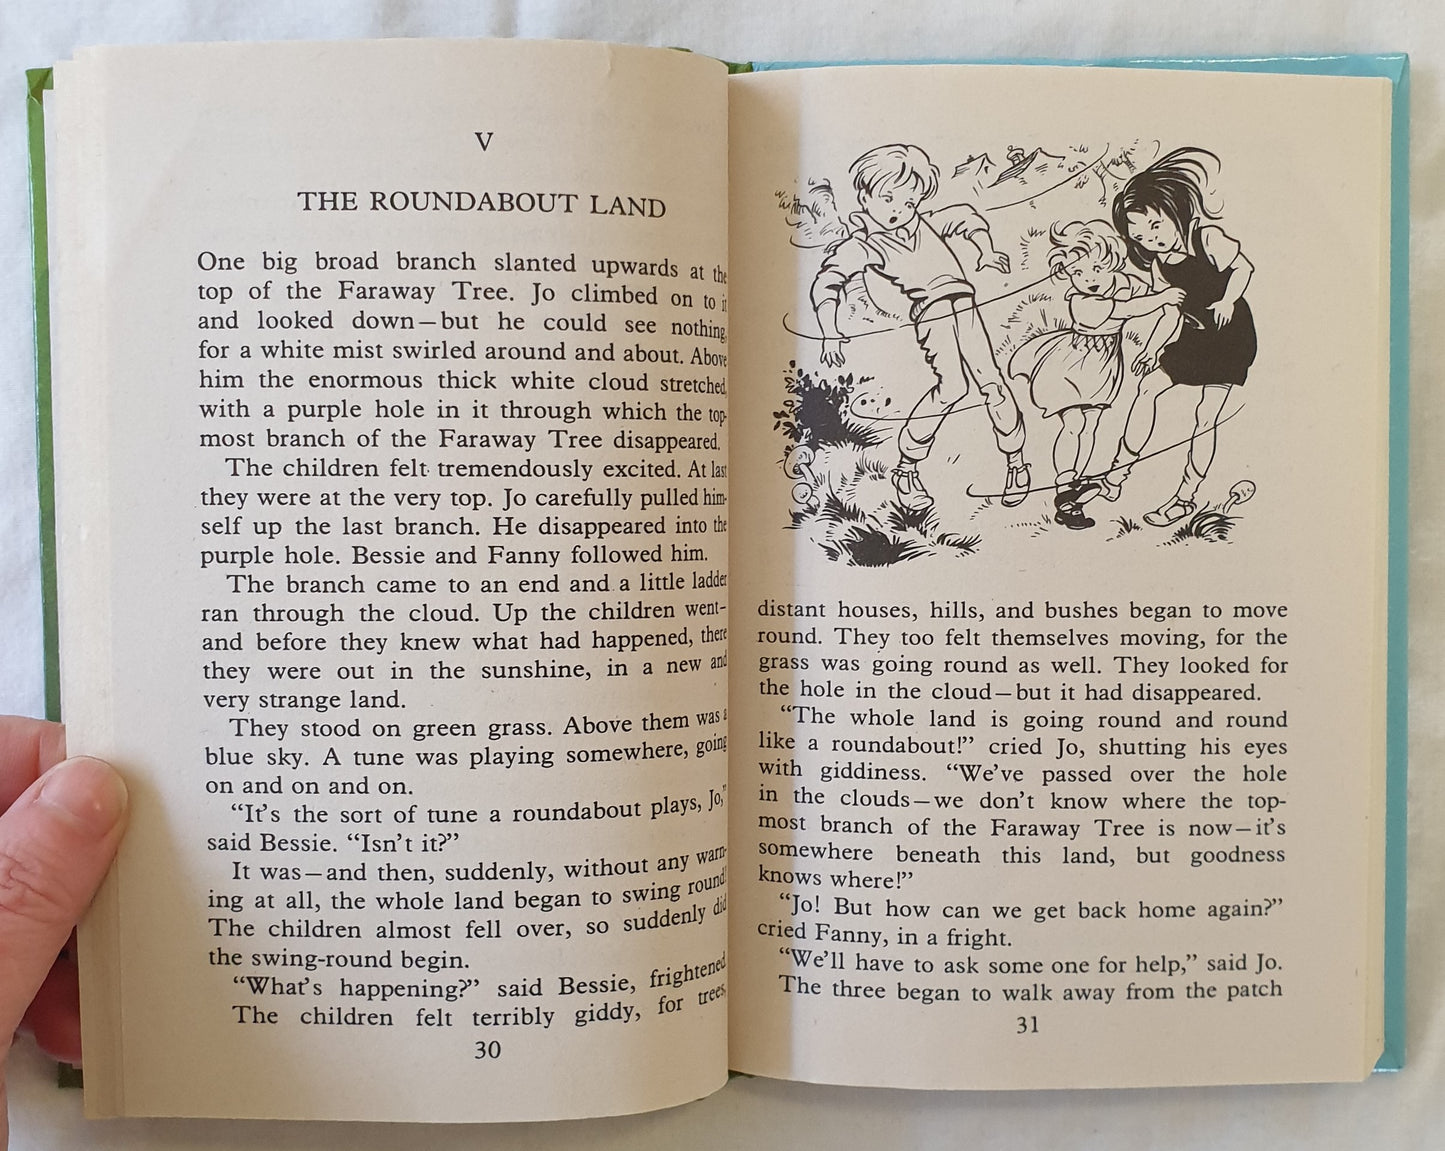 The Enchanted Wood by Enid Blyton